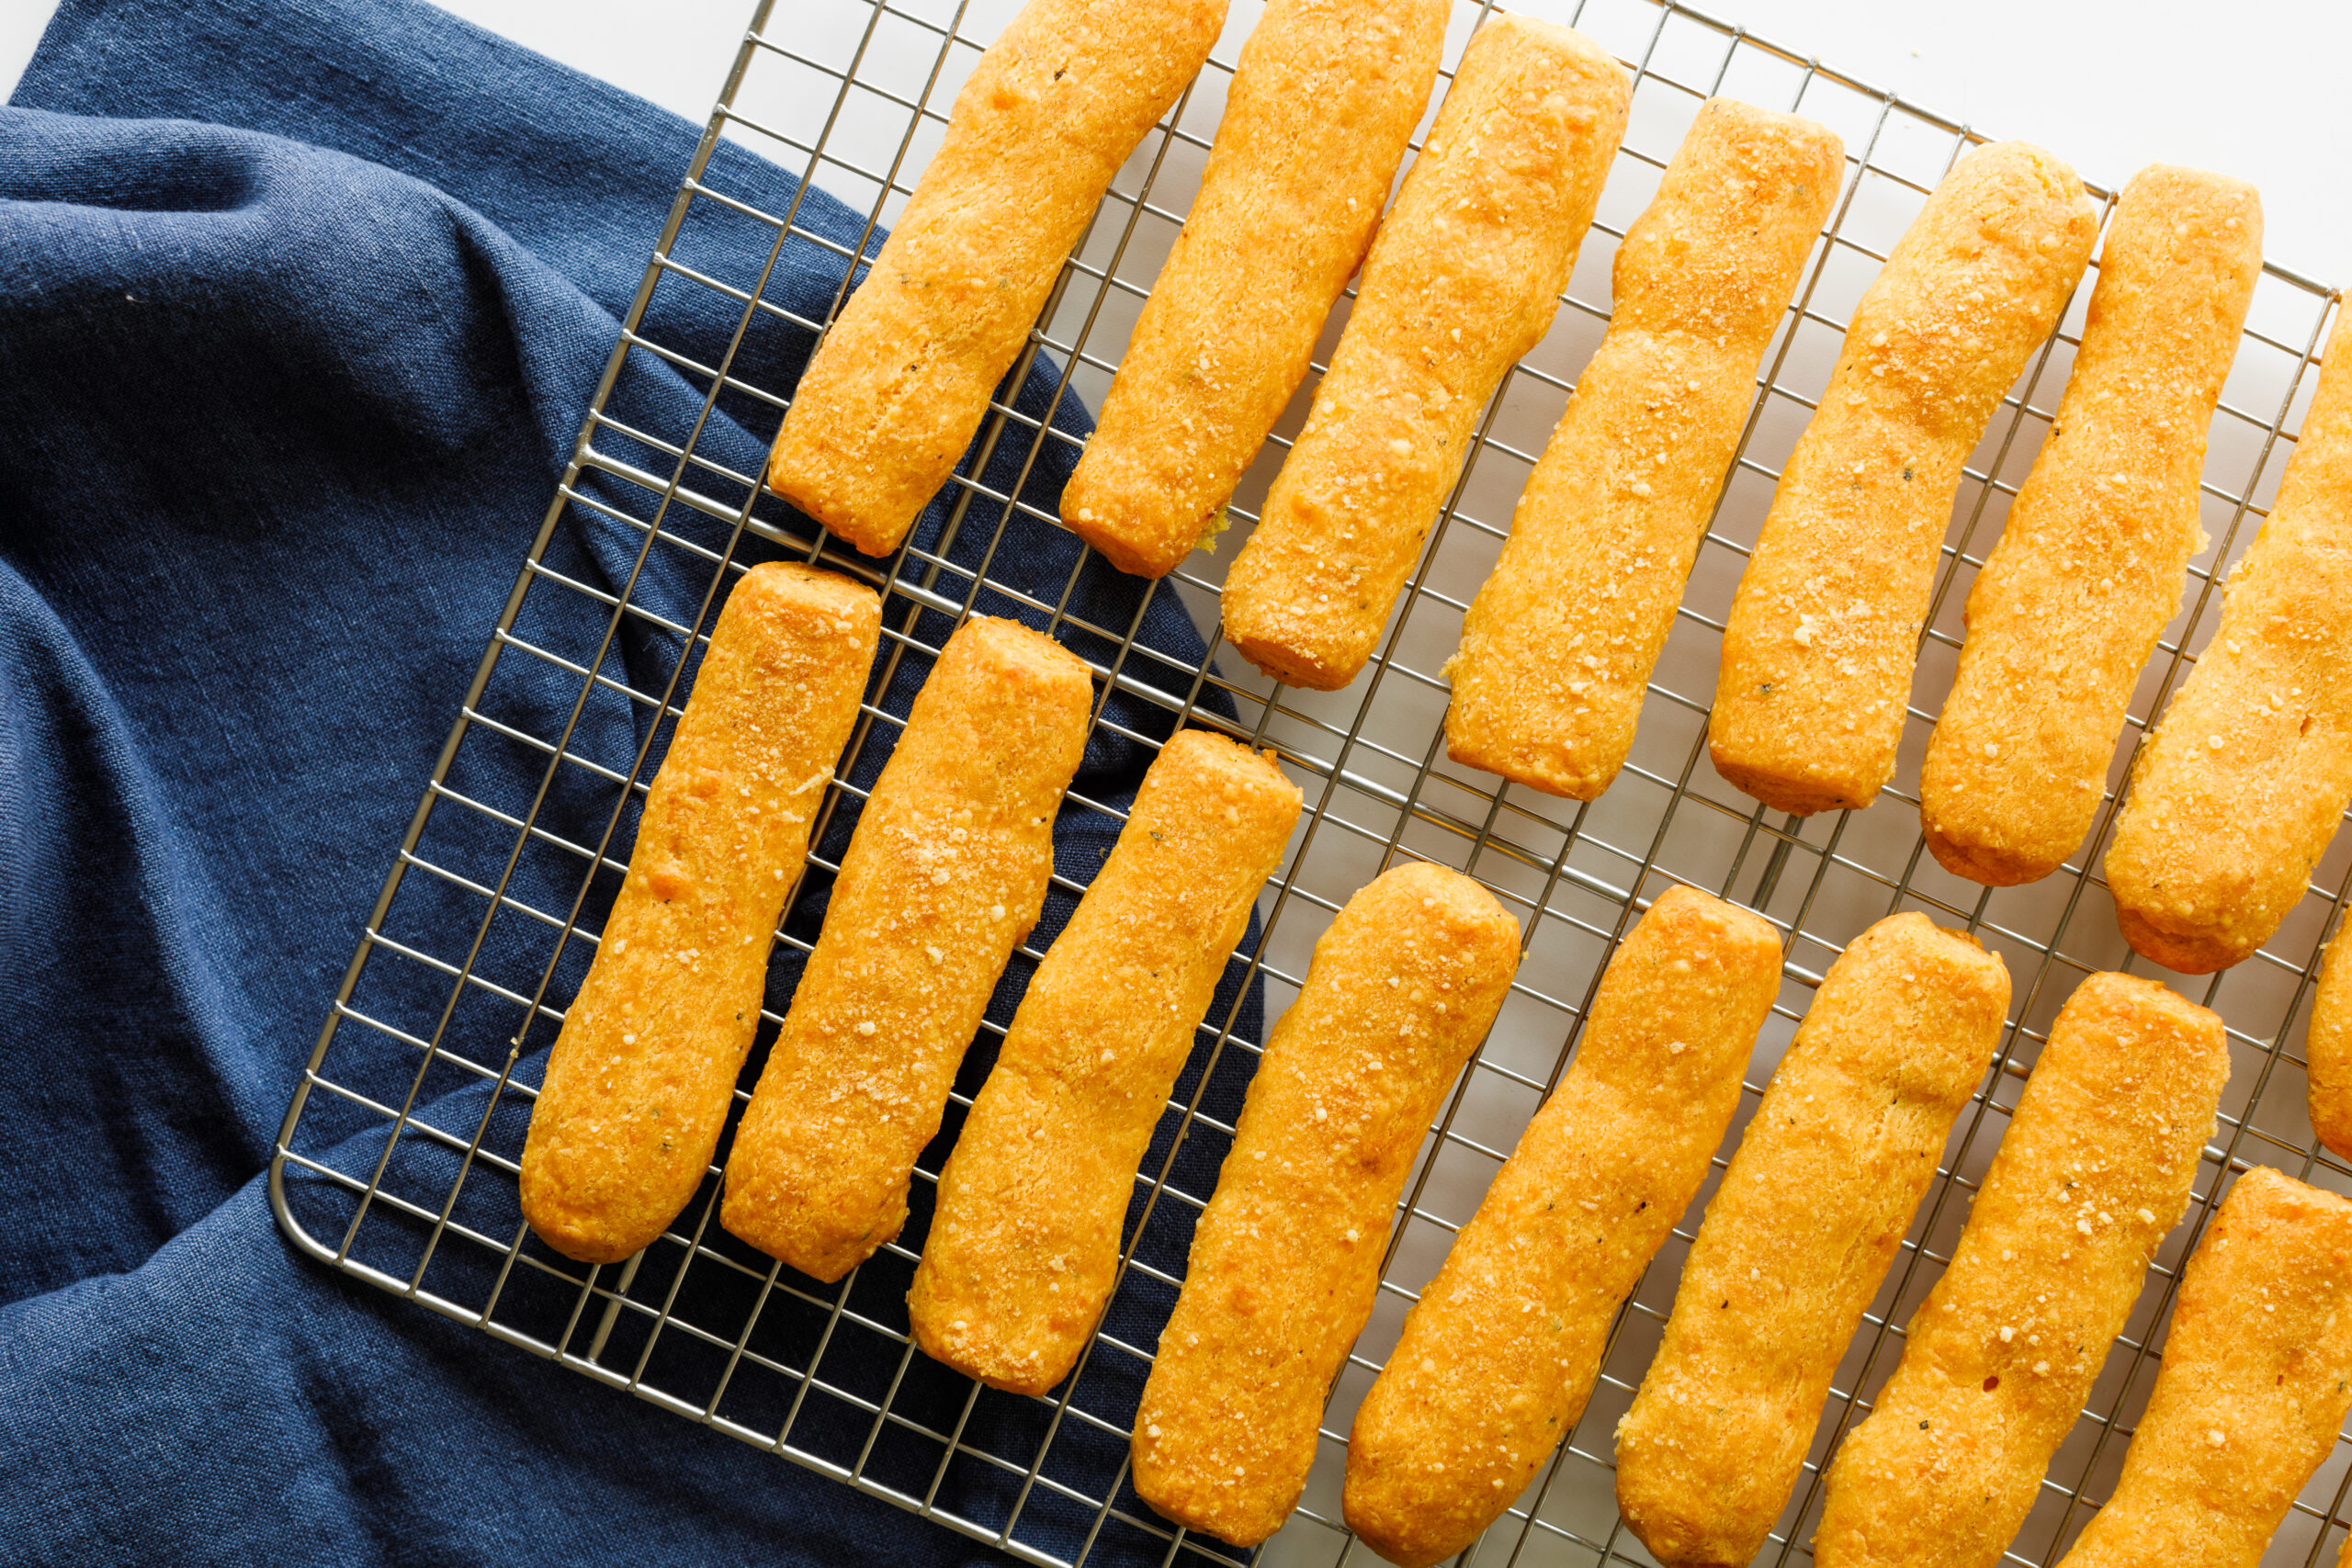 The finished cheese sticks on a cooling rack on top of a blue tablecloth.